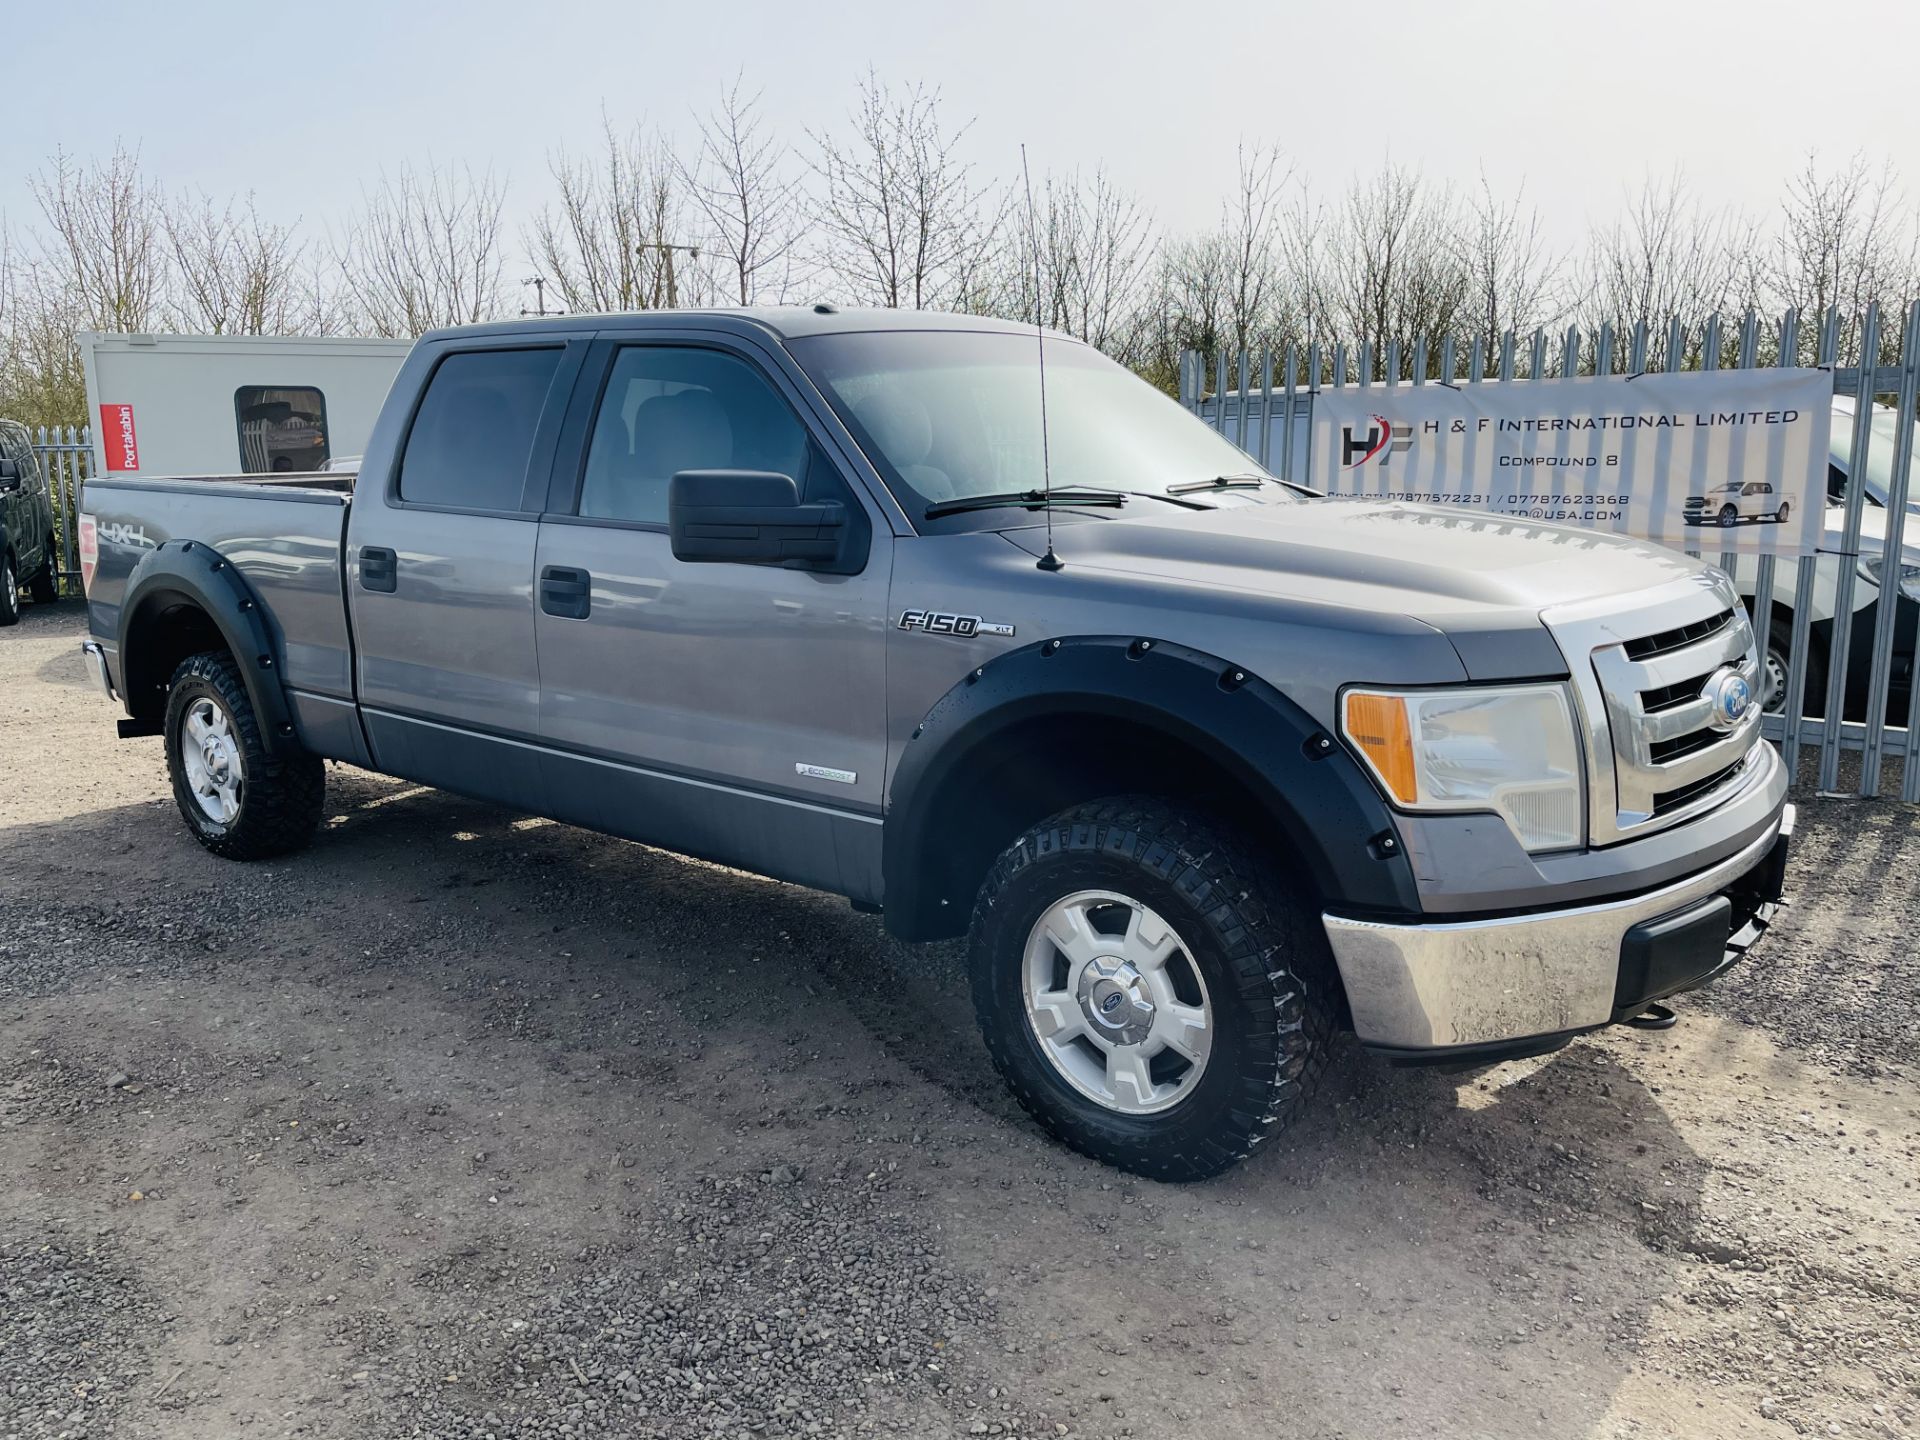 Ford F-150 XLT Edition 3.5L V6 Eco-boost Super-Crew 4x4 - '2012 Year' - Air Con - No Vat save 20% - Image 11 of 25